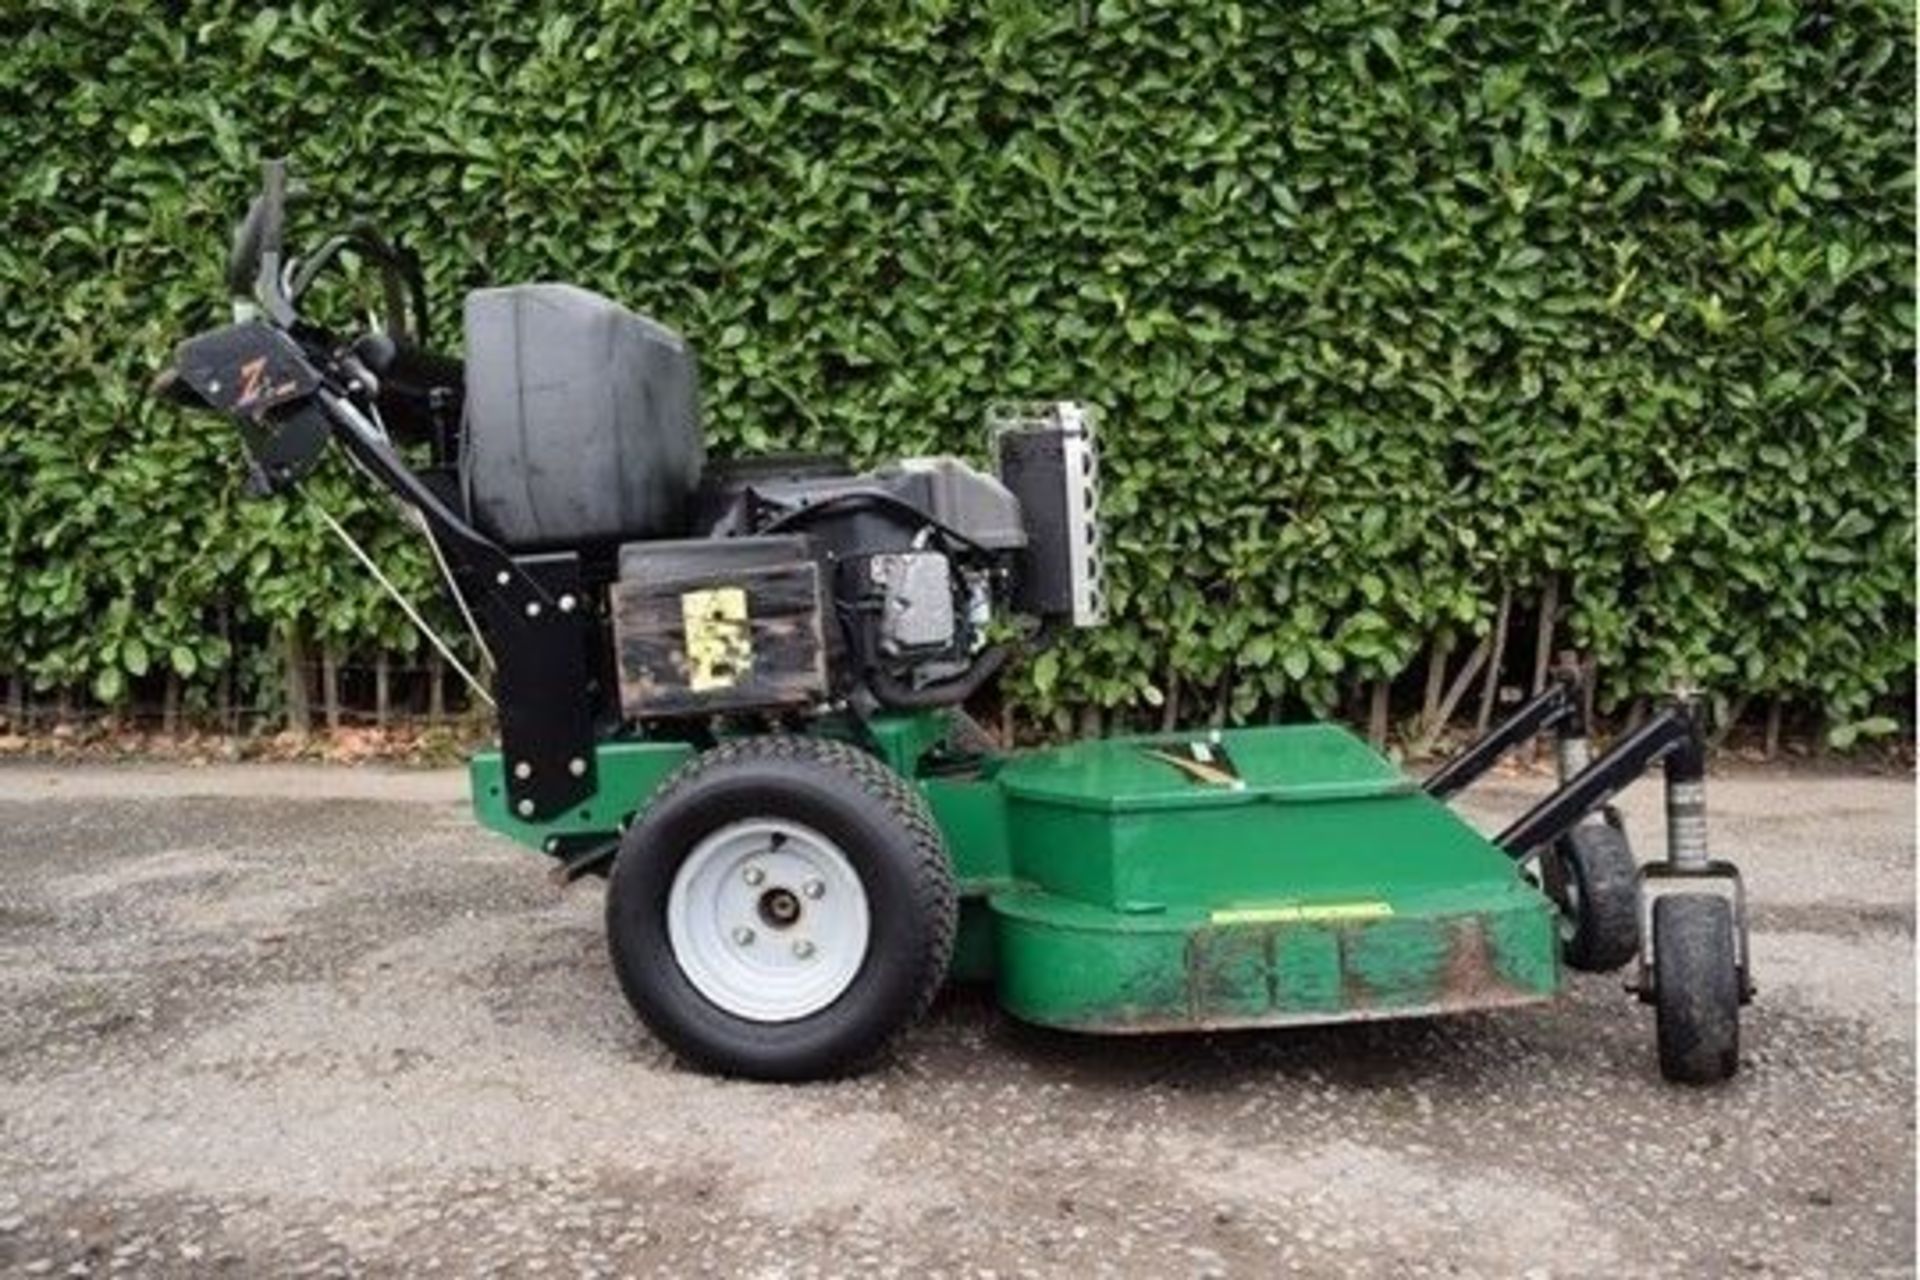 2011 Ransomes Pedestrian 36" Commercial Mower - Image 4 of 7